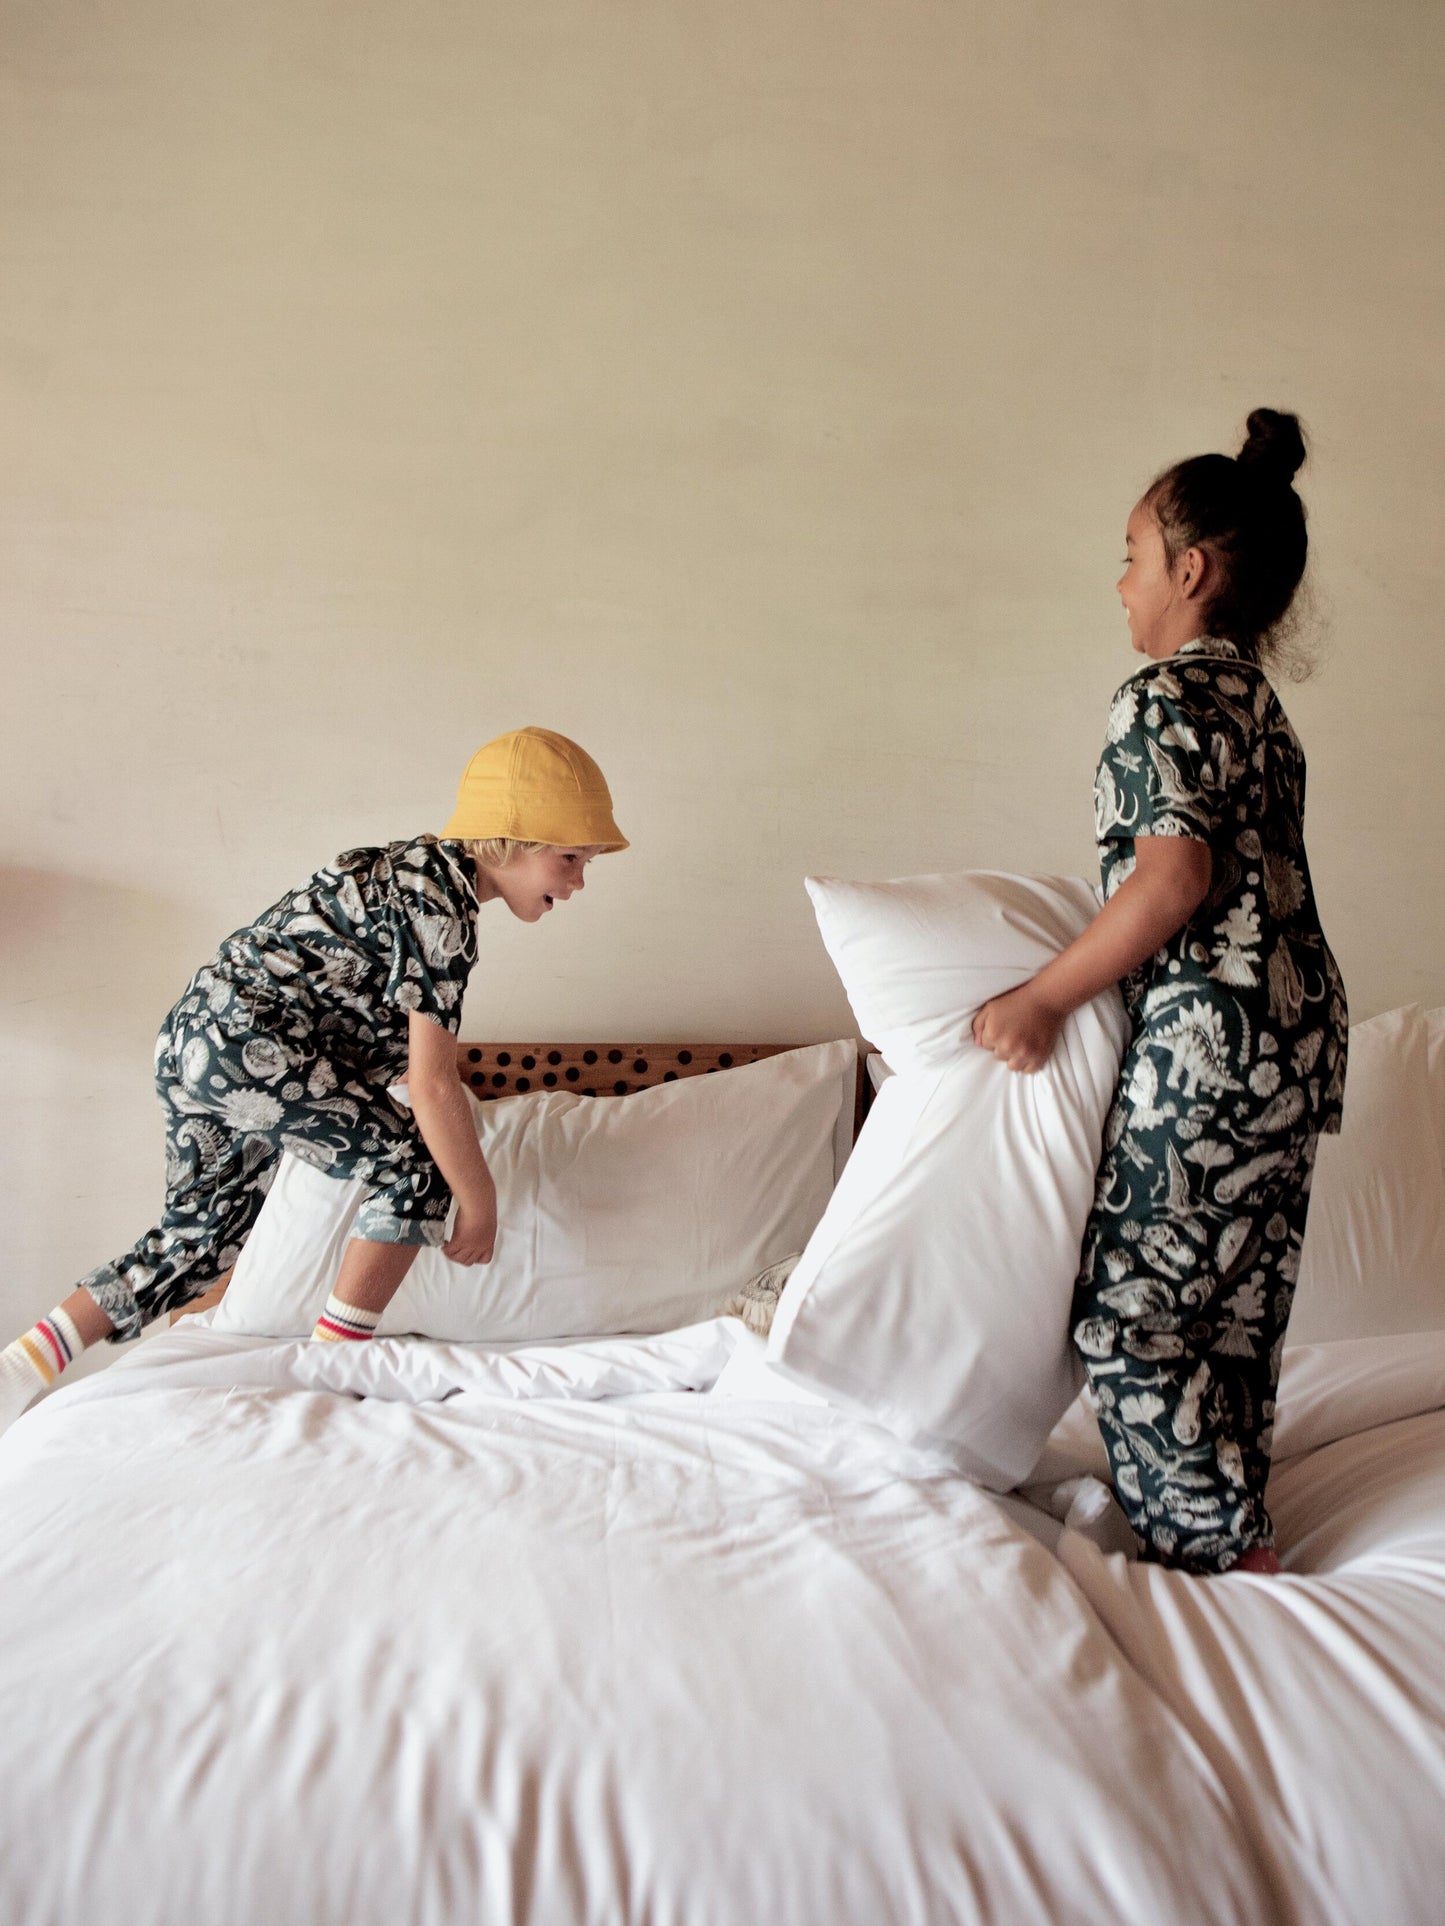 Load image into Gallery viewer, Pillow Fight! - Inspired by the beautiful prehistoric illustration by Tattoo-Artist Suflanda this Children Pyjama Set guarantes sweet dreams.
